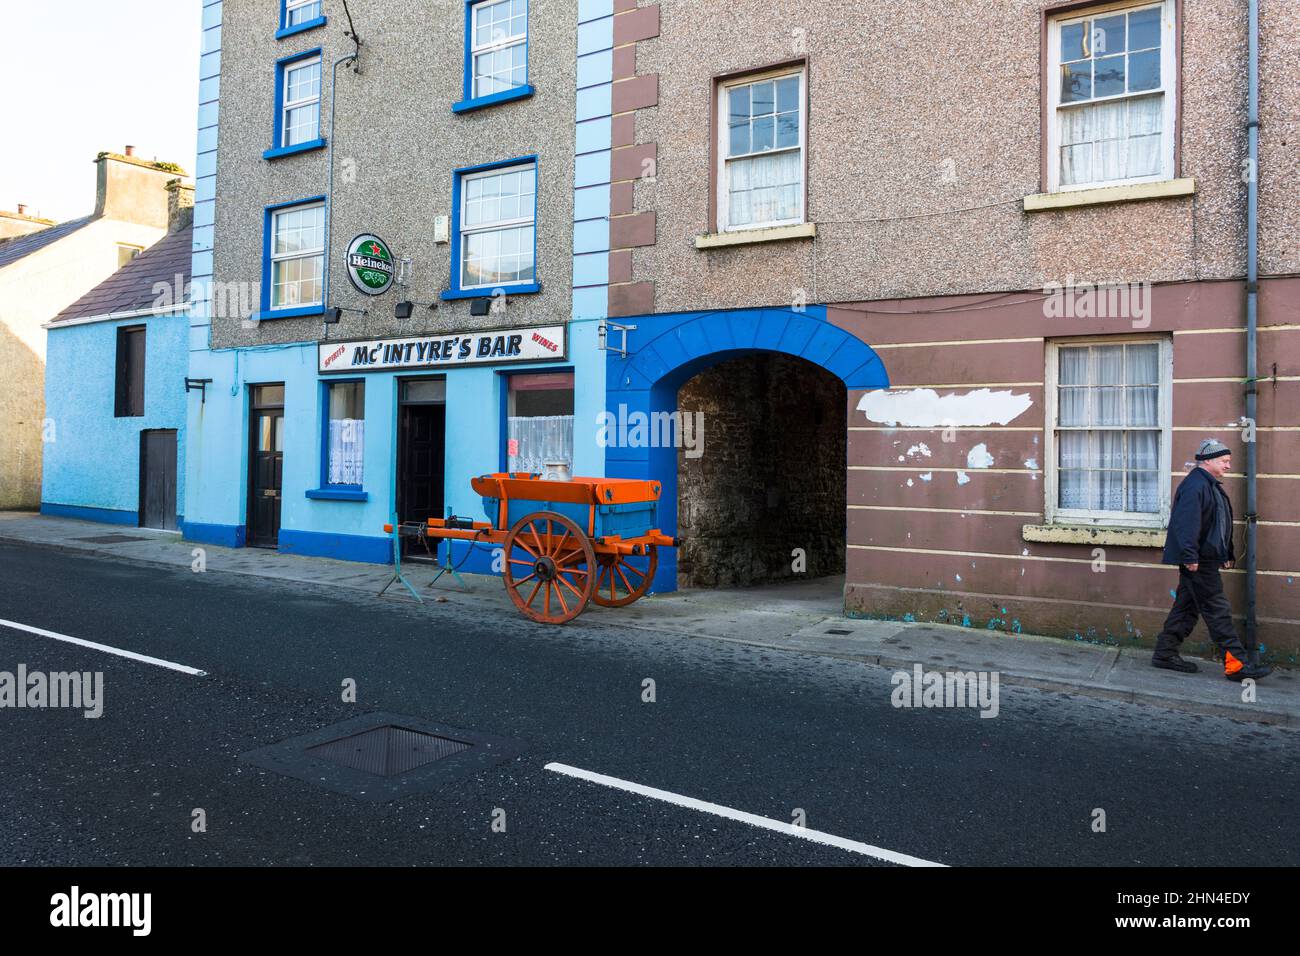 Mc Intyre's Bar, Dunkineely, County Donegal, Ireland Stock Photo